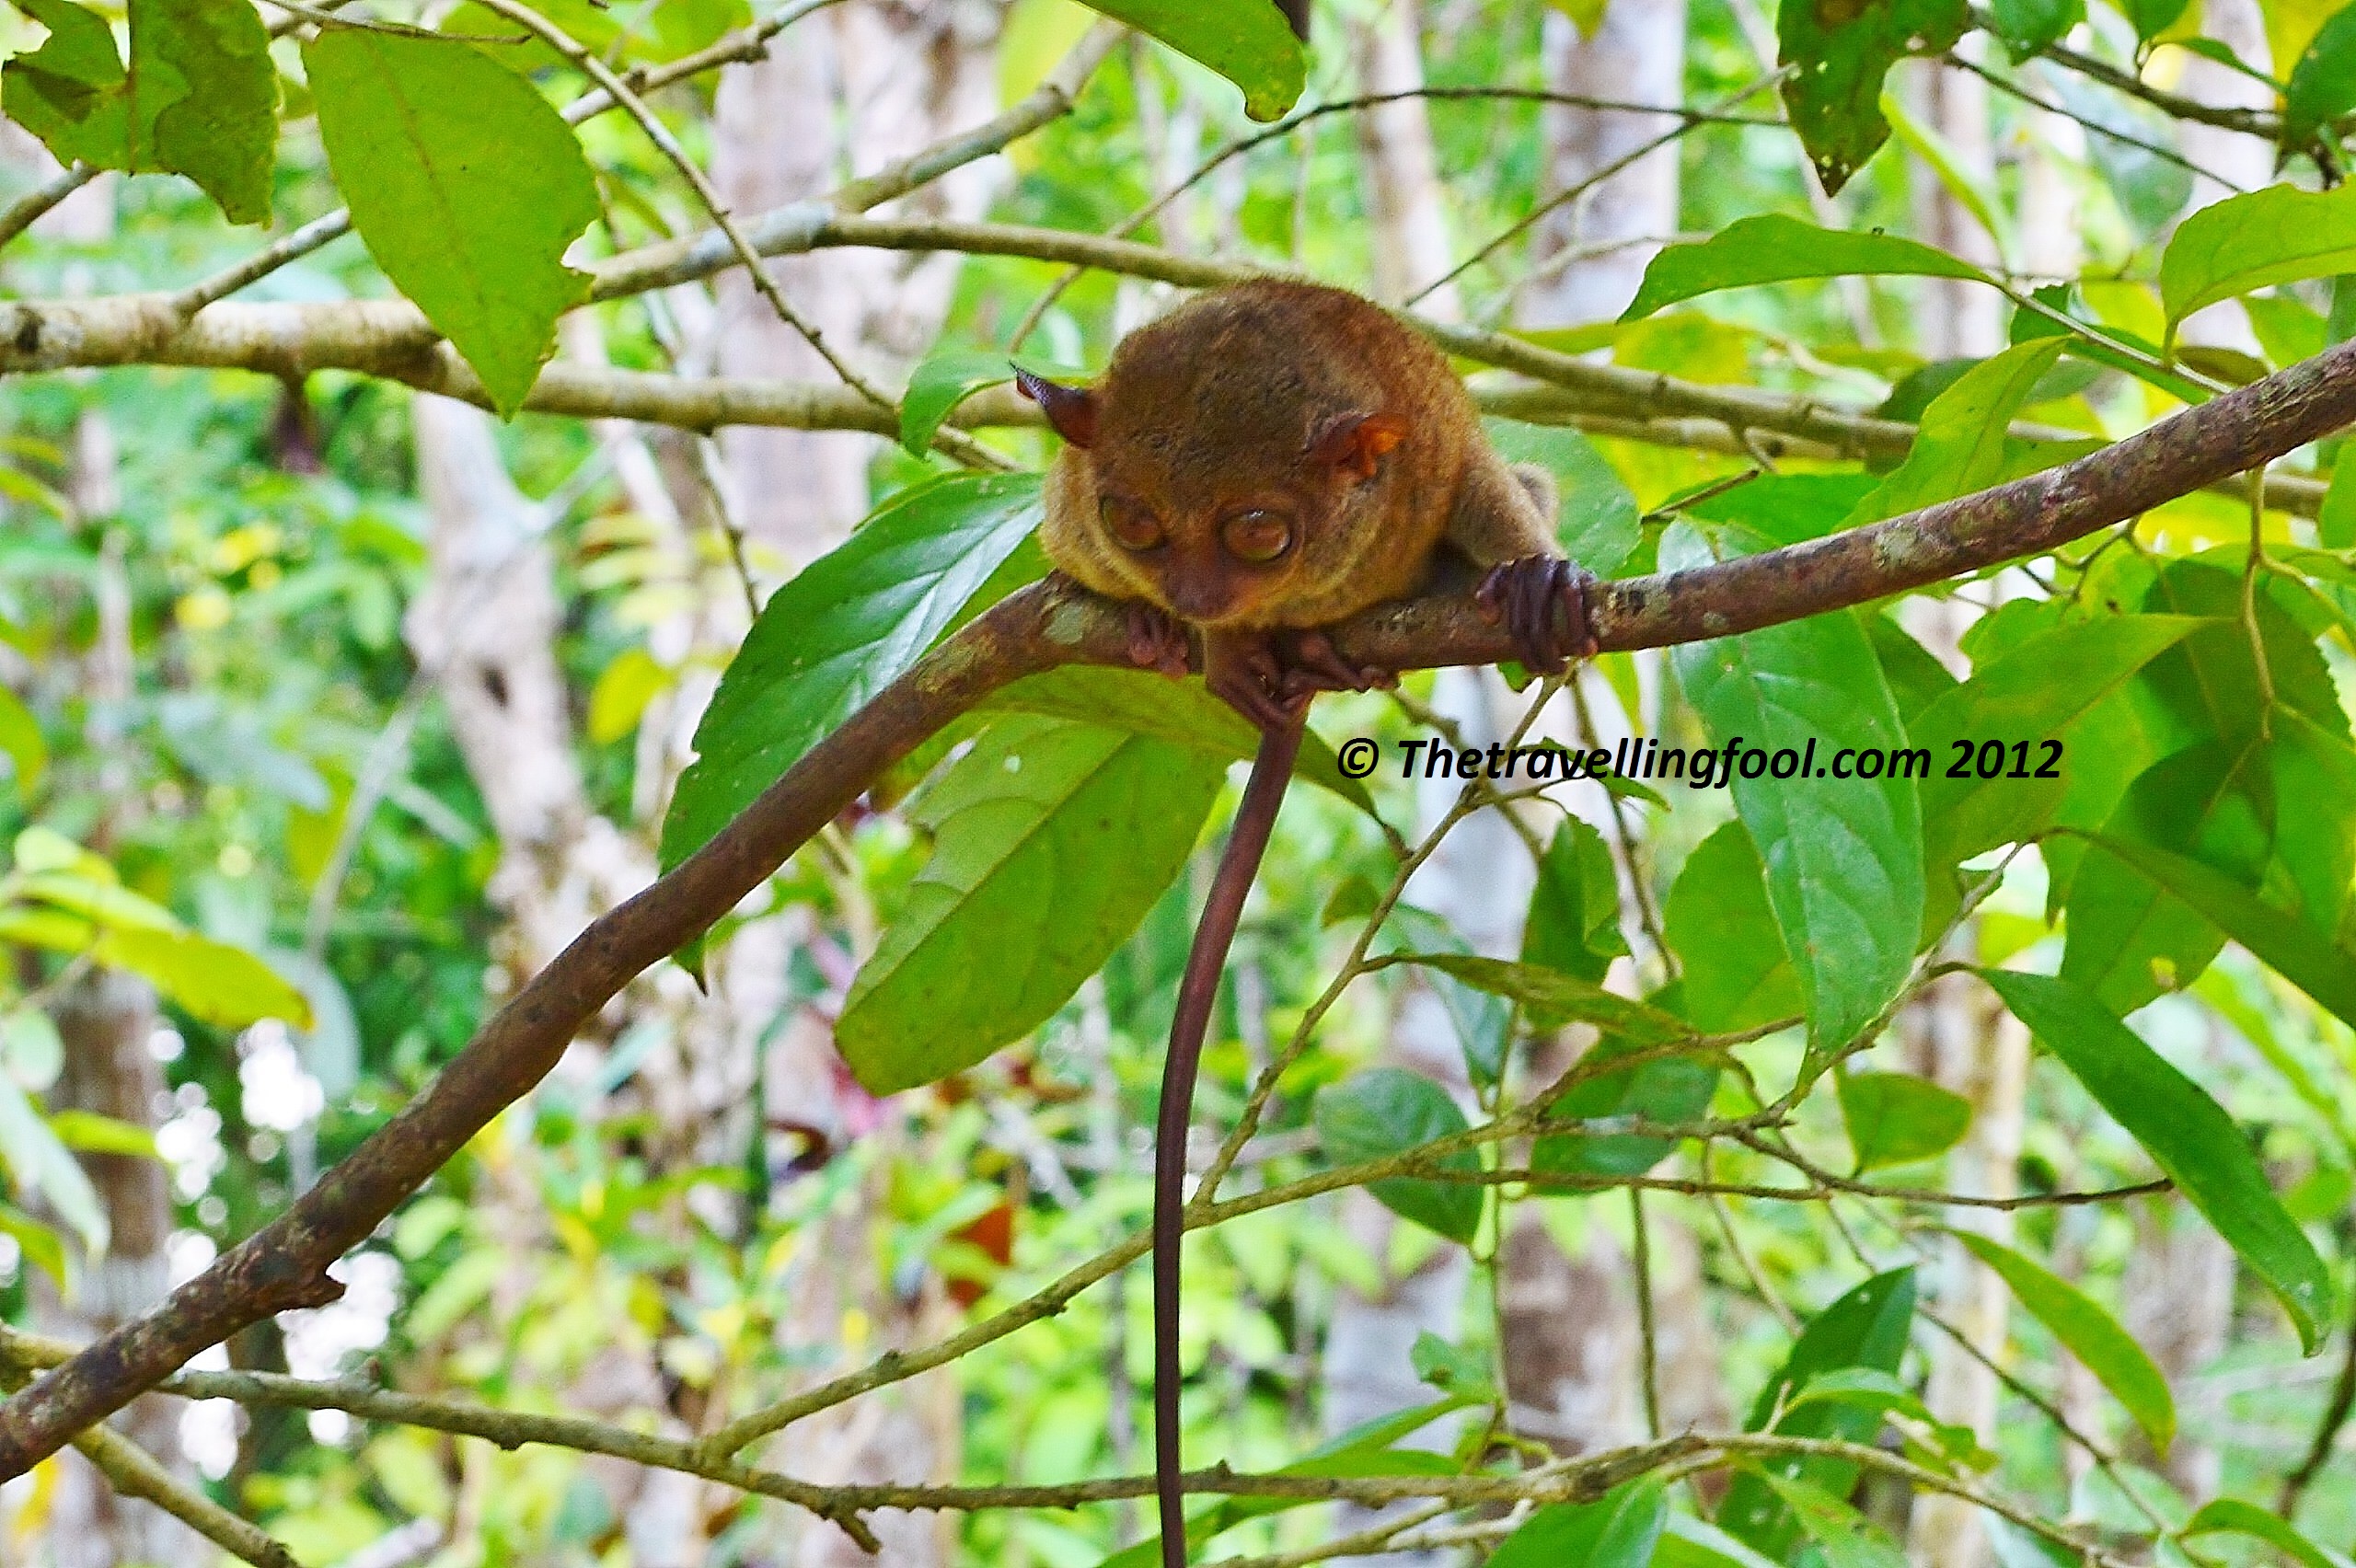 The Heartbreaking Story Of The Philippine Tarsier Of Bohol: And Why They Commit Suicide